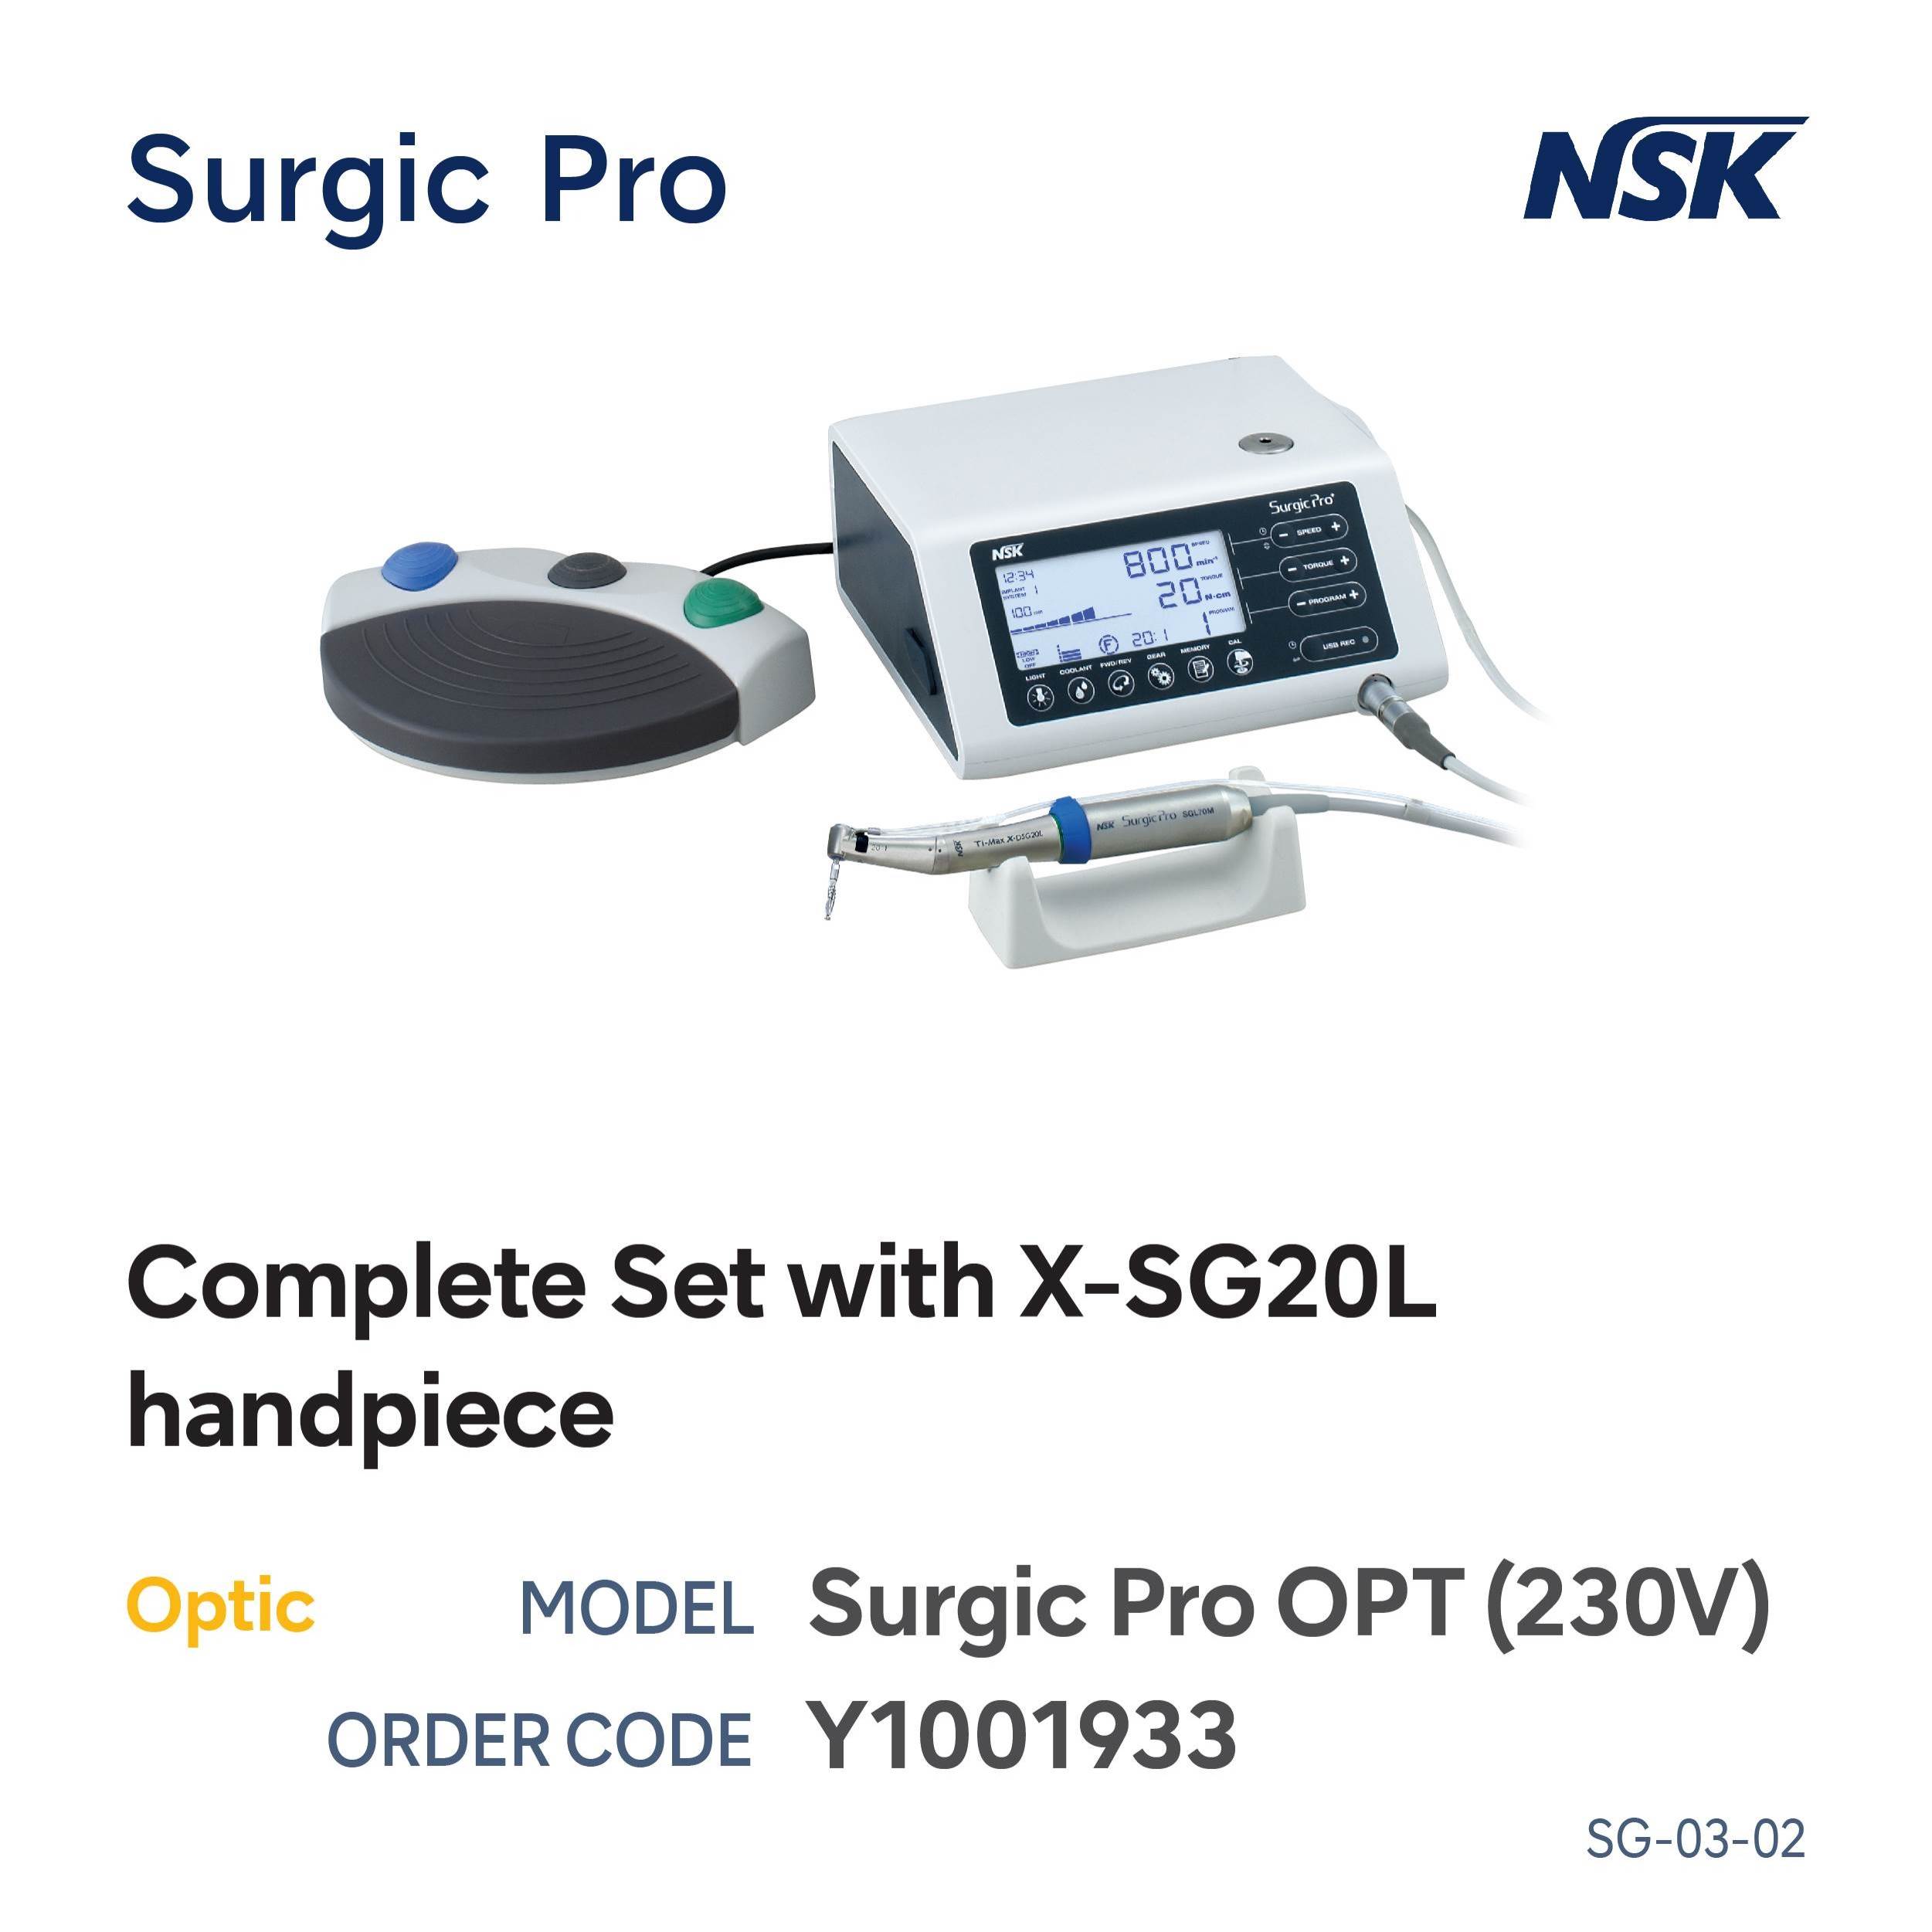 Surgic Pro Optic D 230 V With XSG20L Handpiece